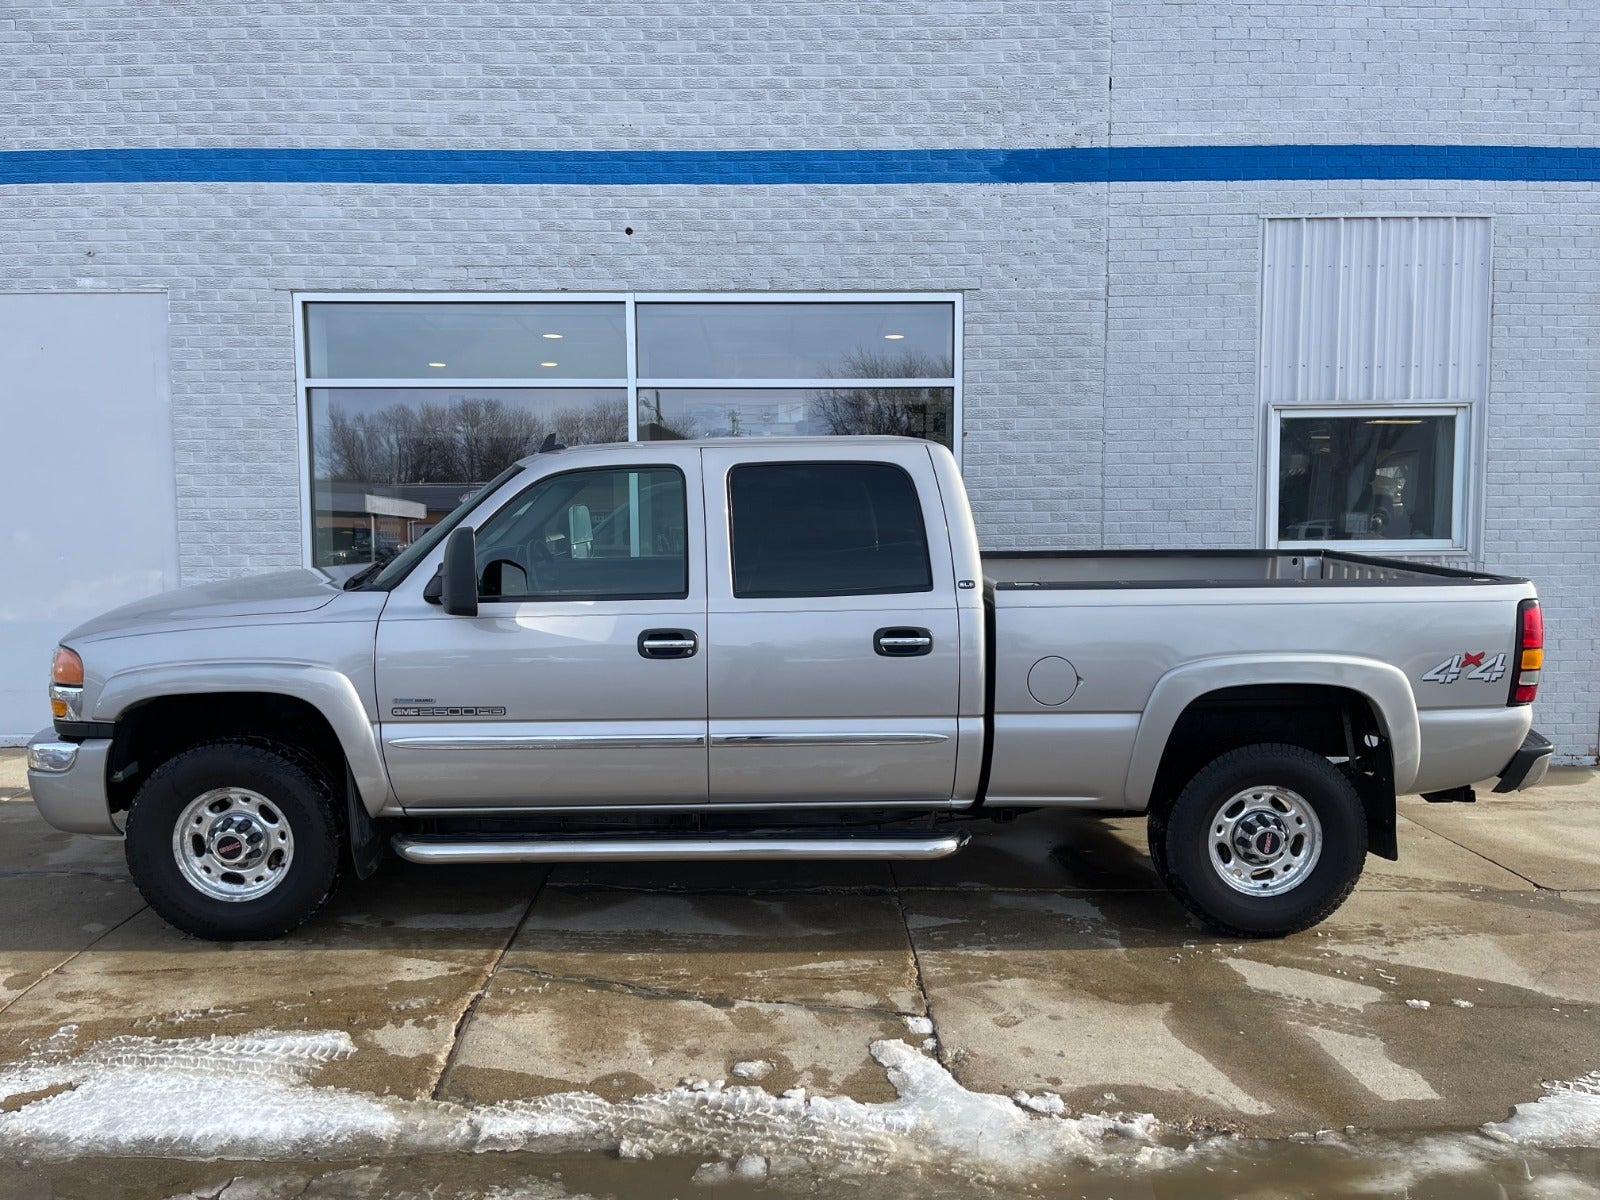 Used 2007 GMC Sierra Classic 2500HD SLE1 with VIN 1GTHK23D87F172291 for sale in Edgerton, Minnesota